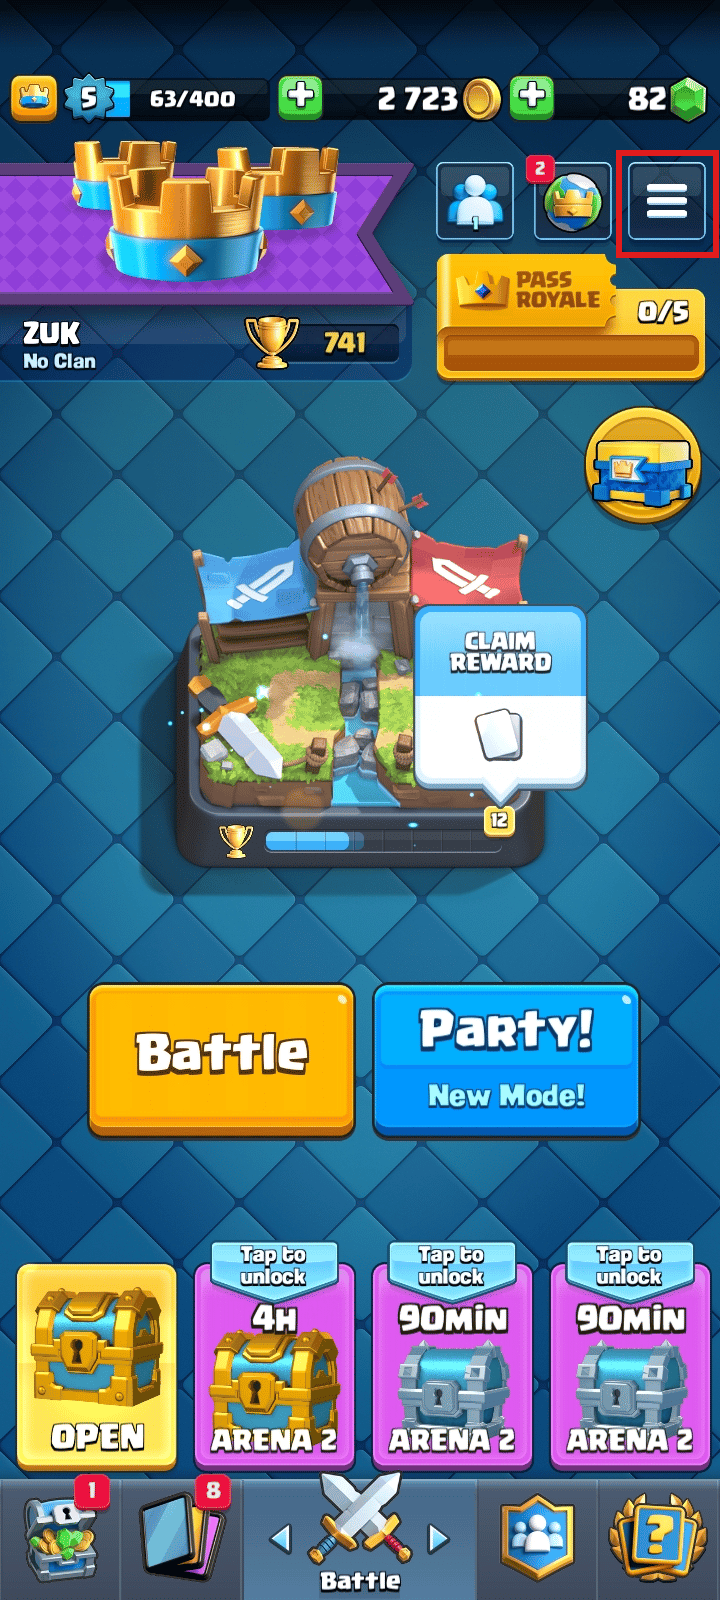 Tap on the hamburger menu icon on the top right of the screen | How to delete clash royale account | remove Supercell ID from Clash Royale